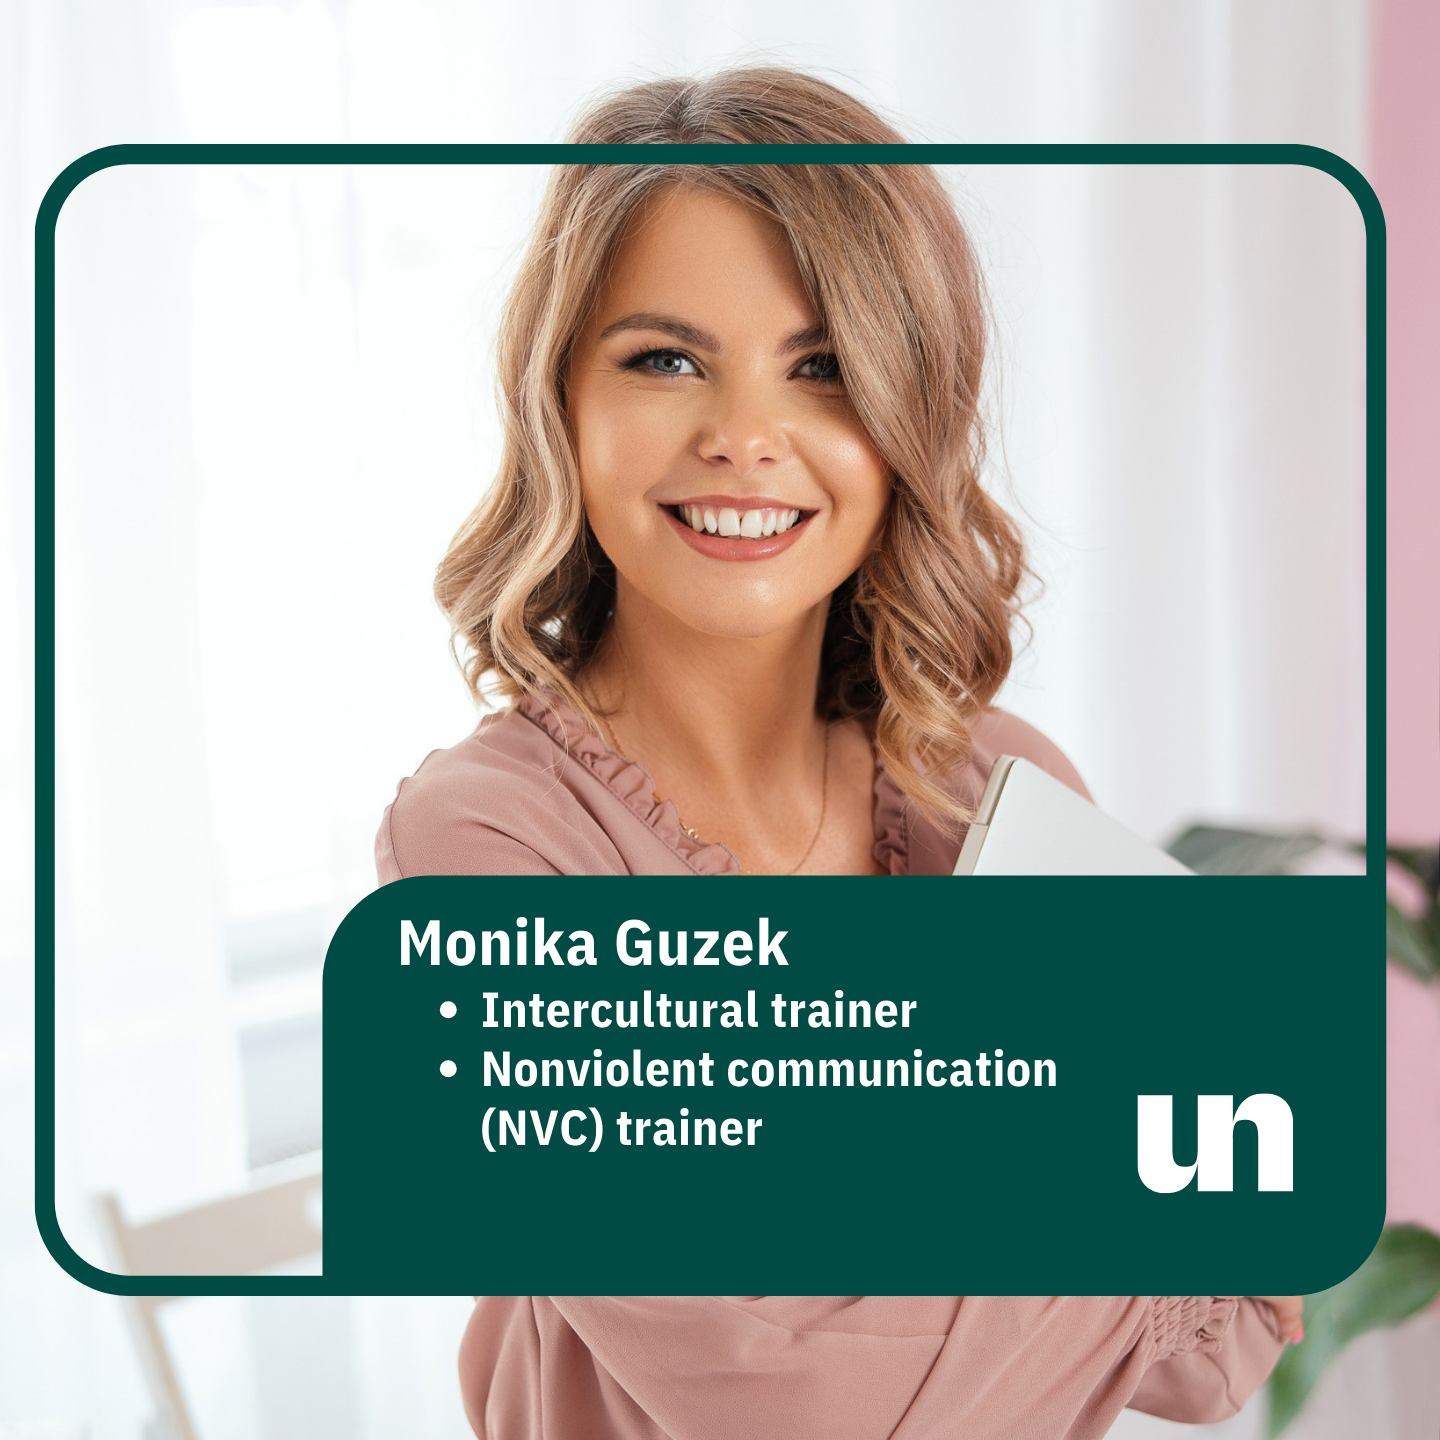 Click and get more info about Monika Guzek